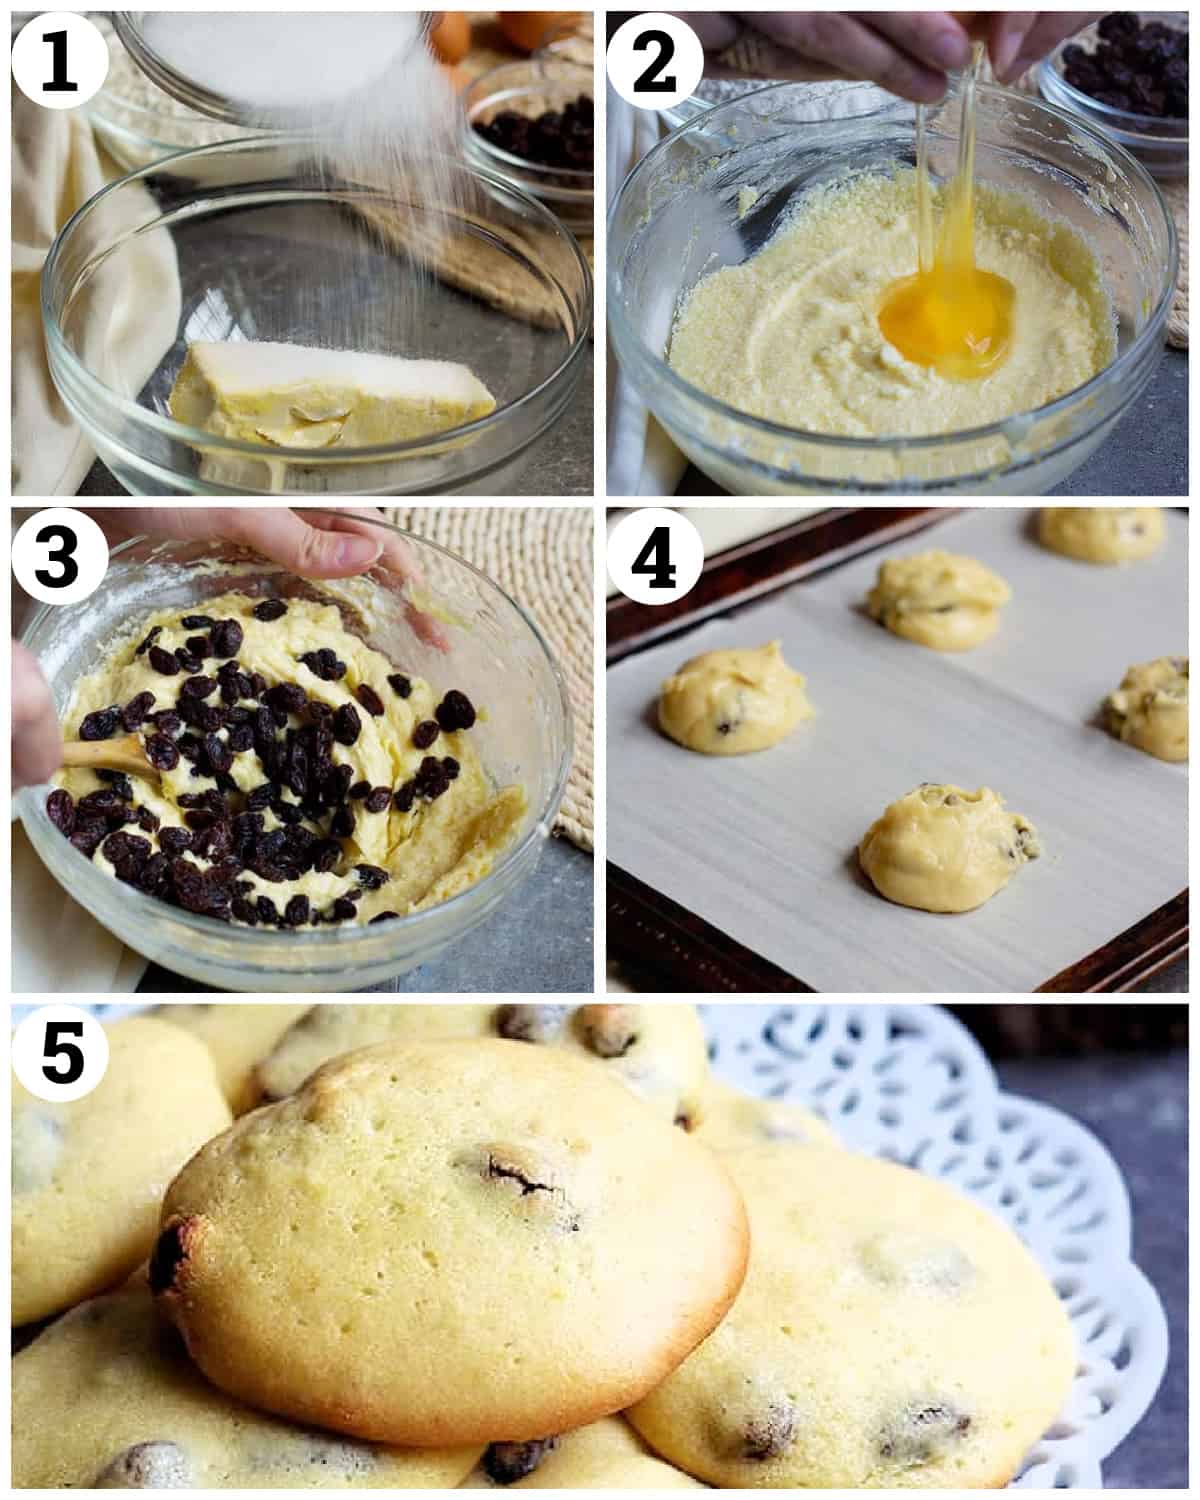 cream butter and sugar, add eggs and the dry ingredients, add the raisins and bake. 